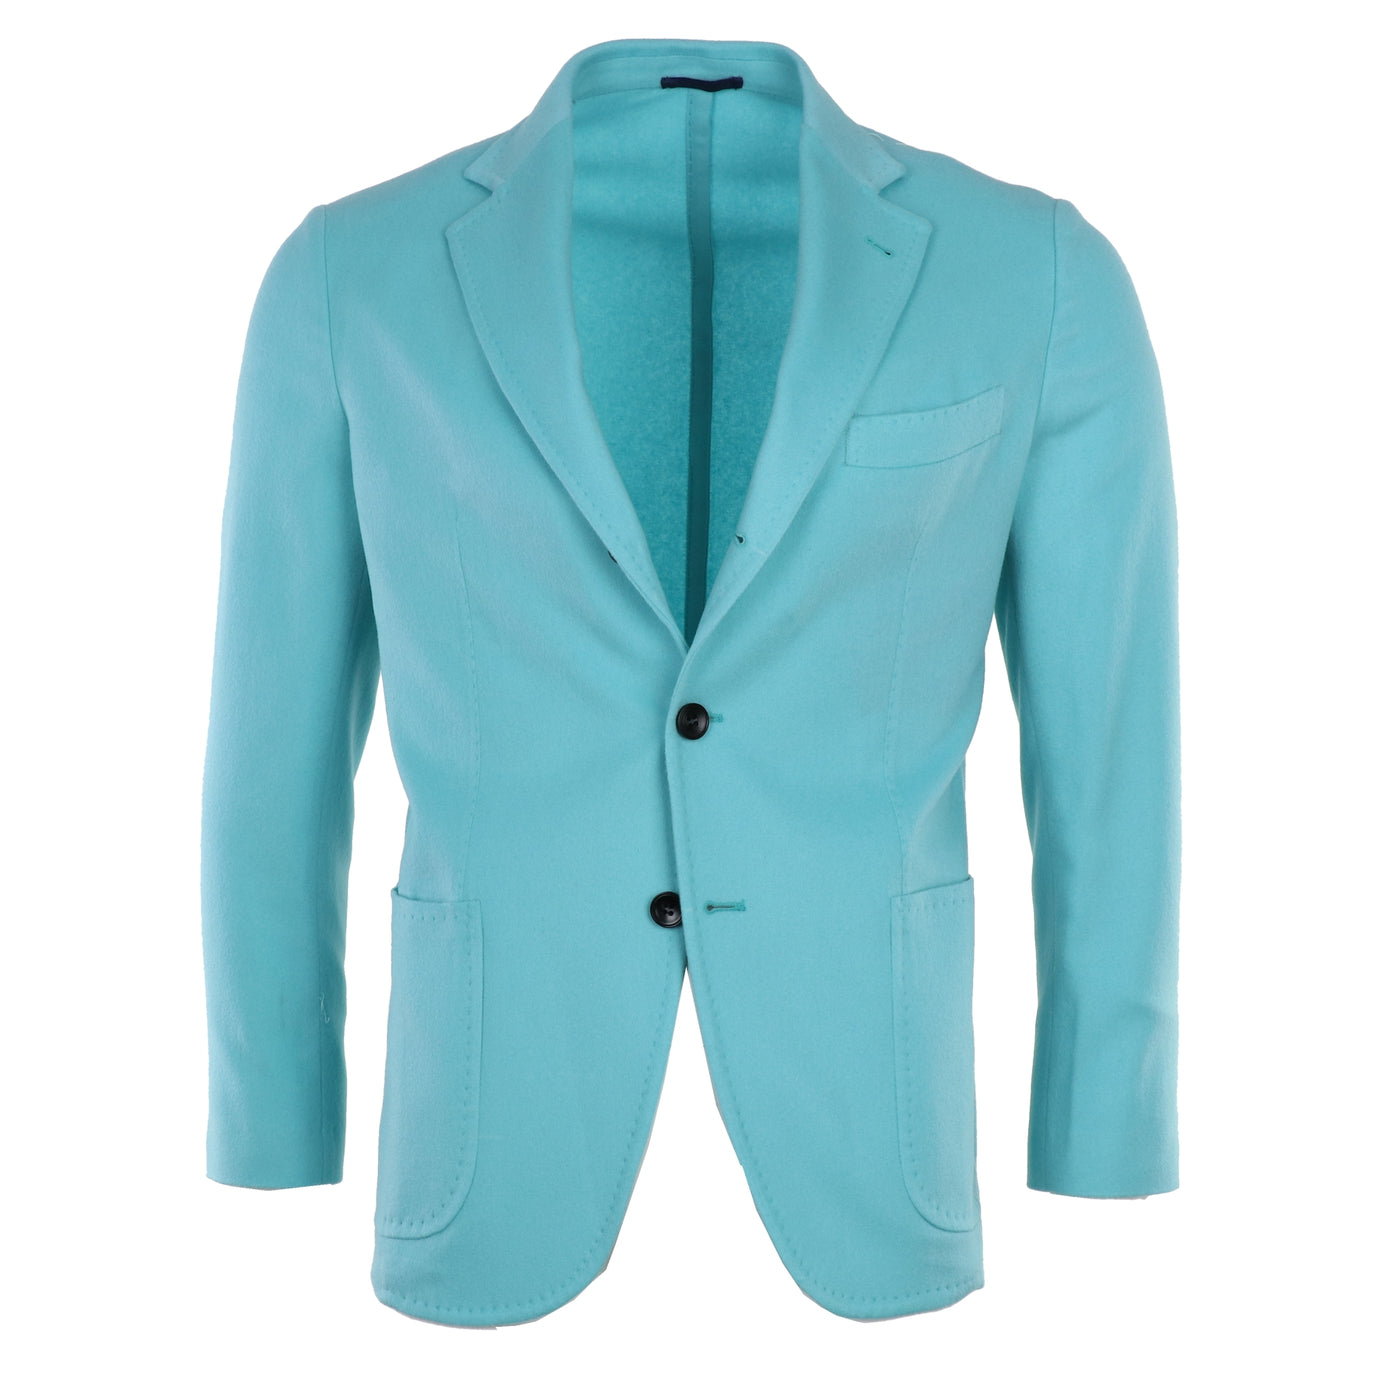 Summer Cashmere Soft Coat in Tiffany Blue Size 40R